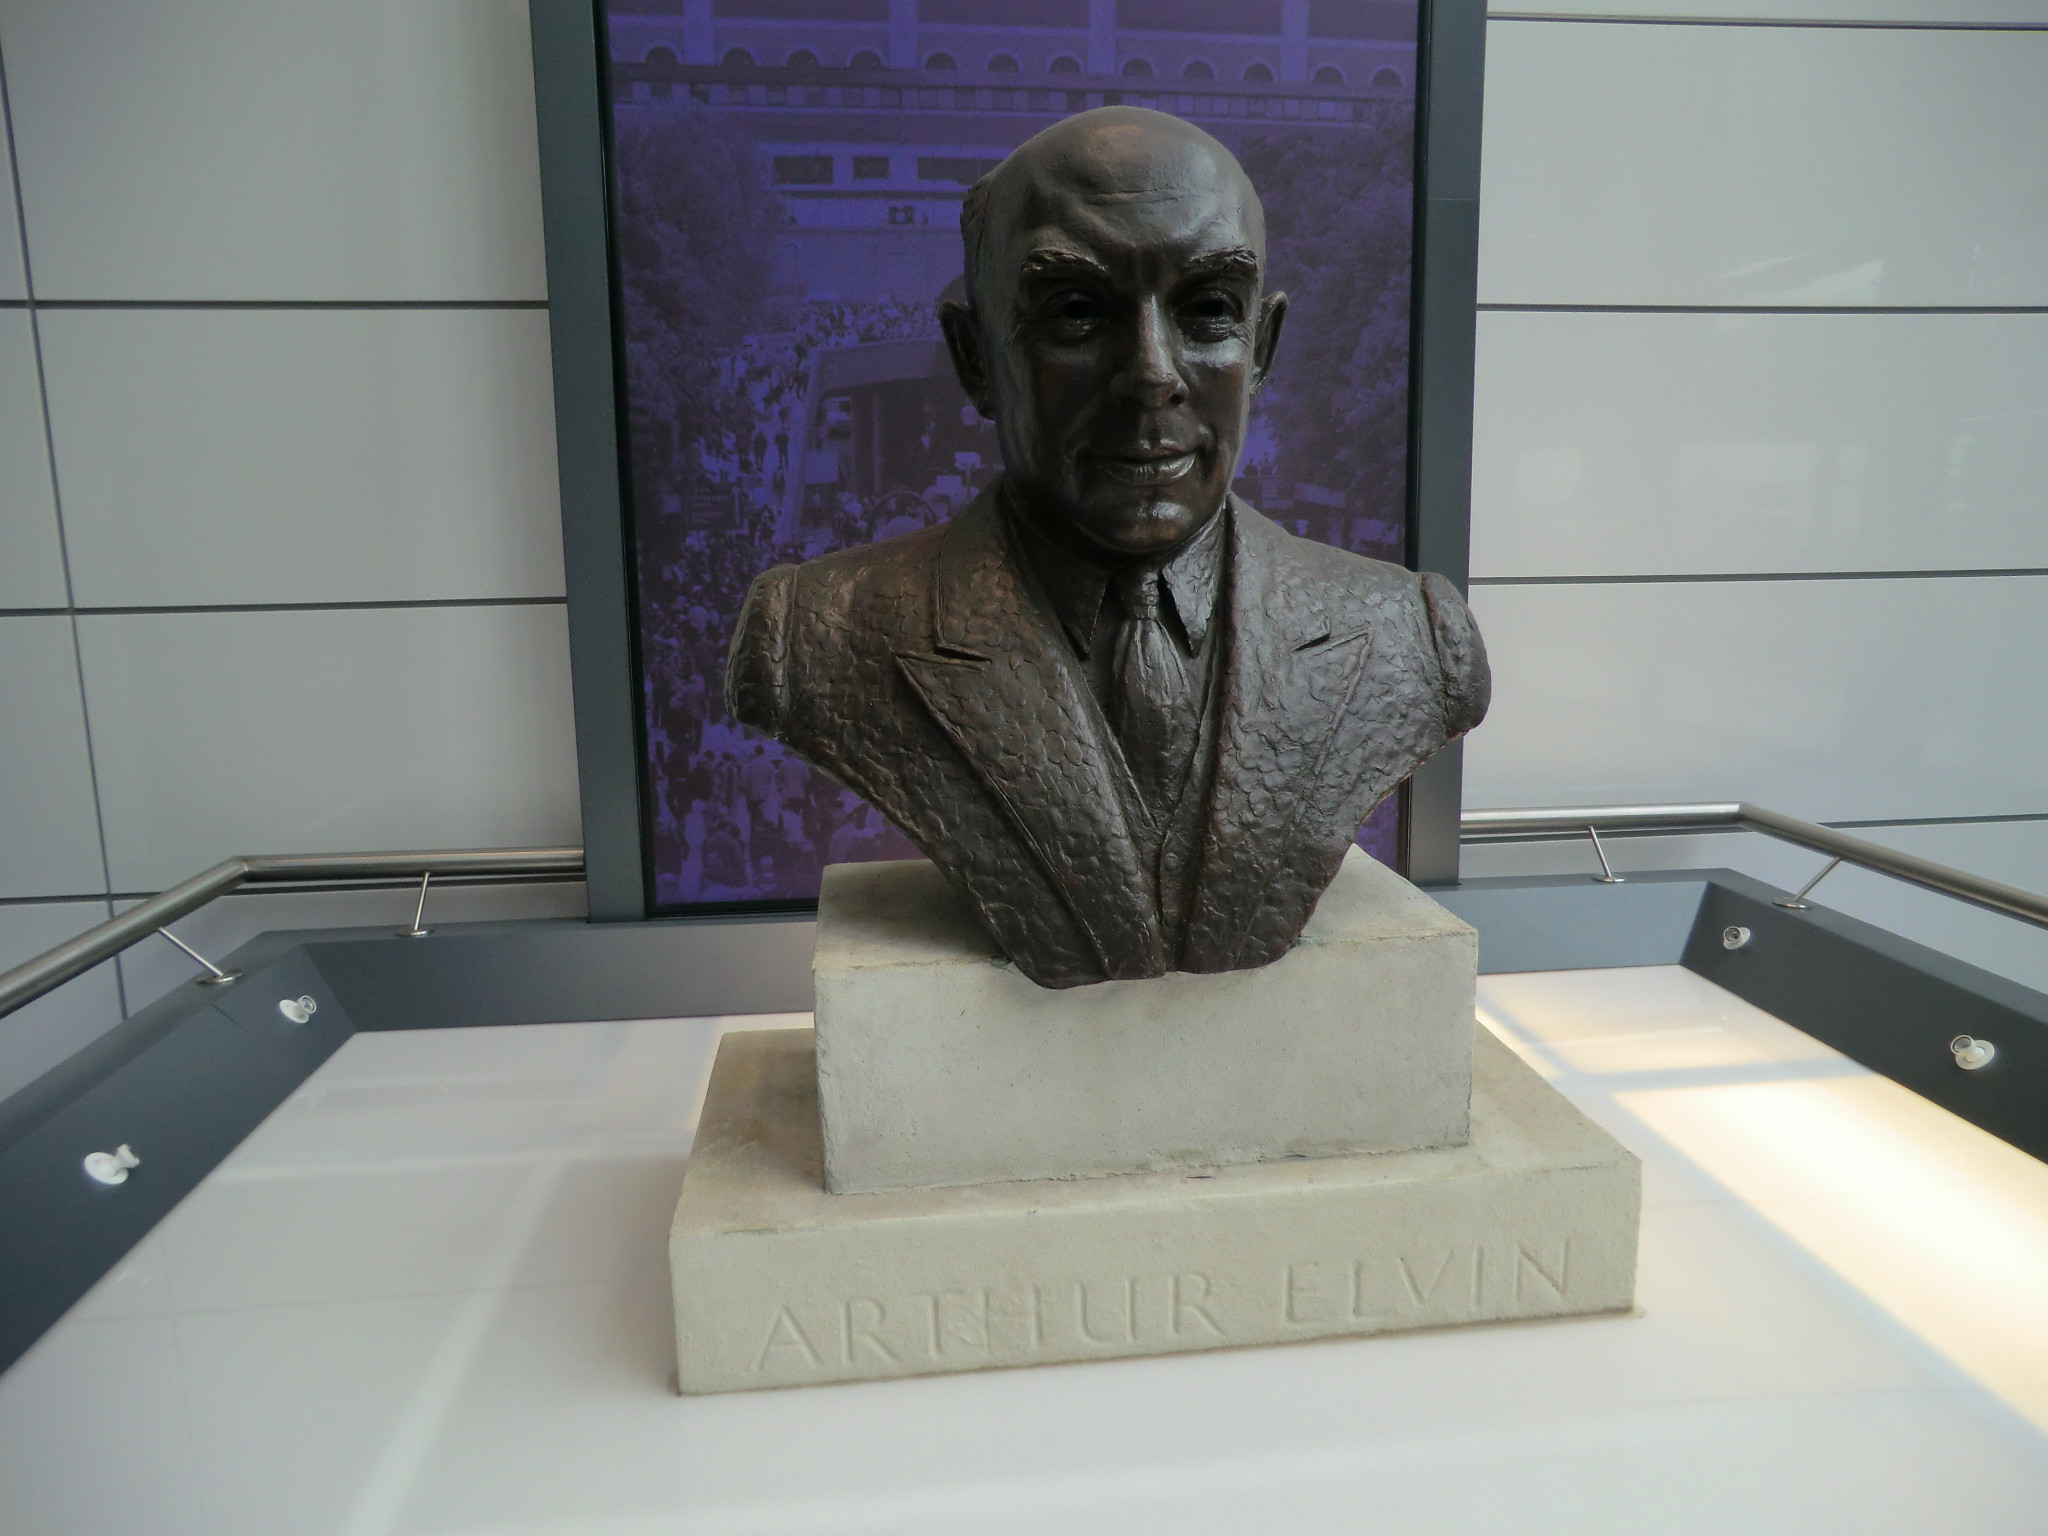 The bust of Sir Arthur Elvin is now positioned in the entrance hall at Wembley Stadium ©ITG